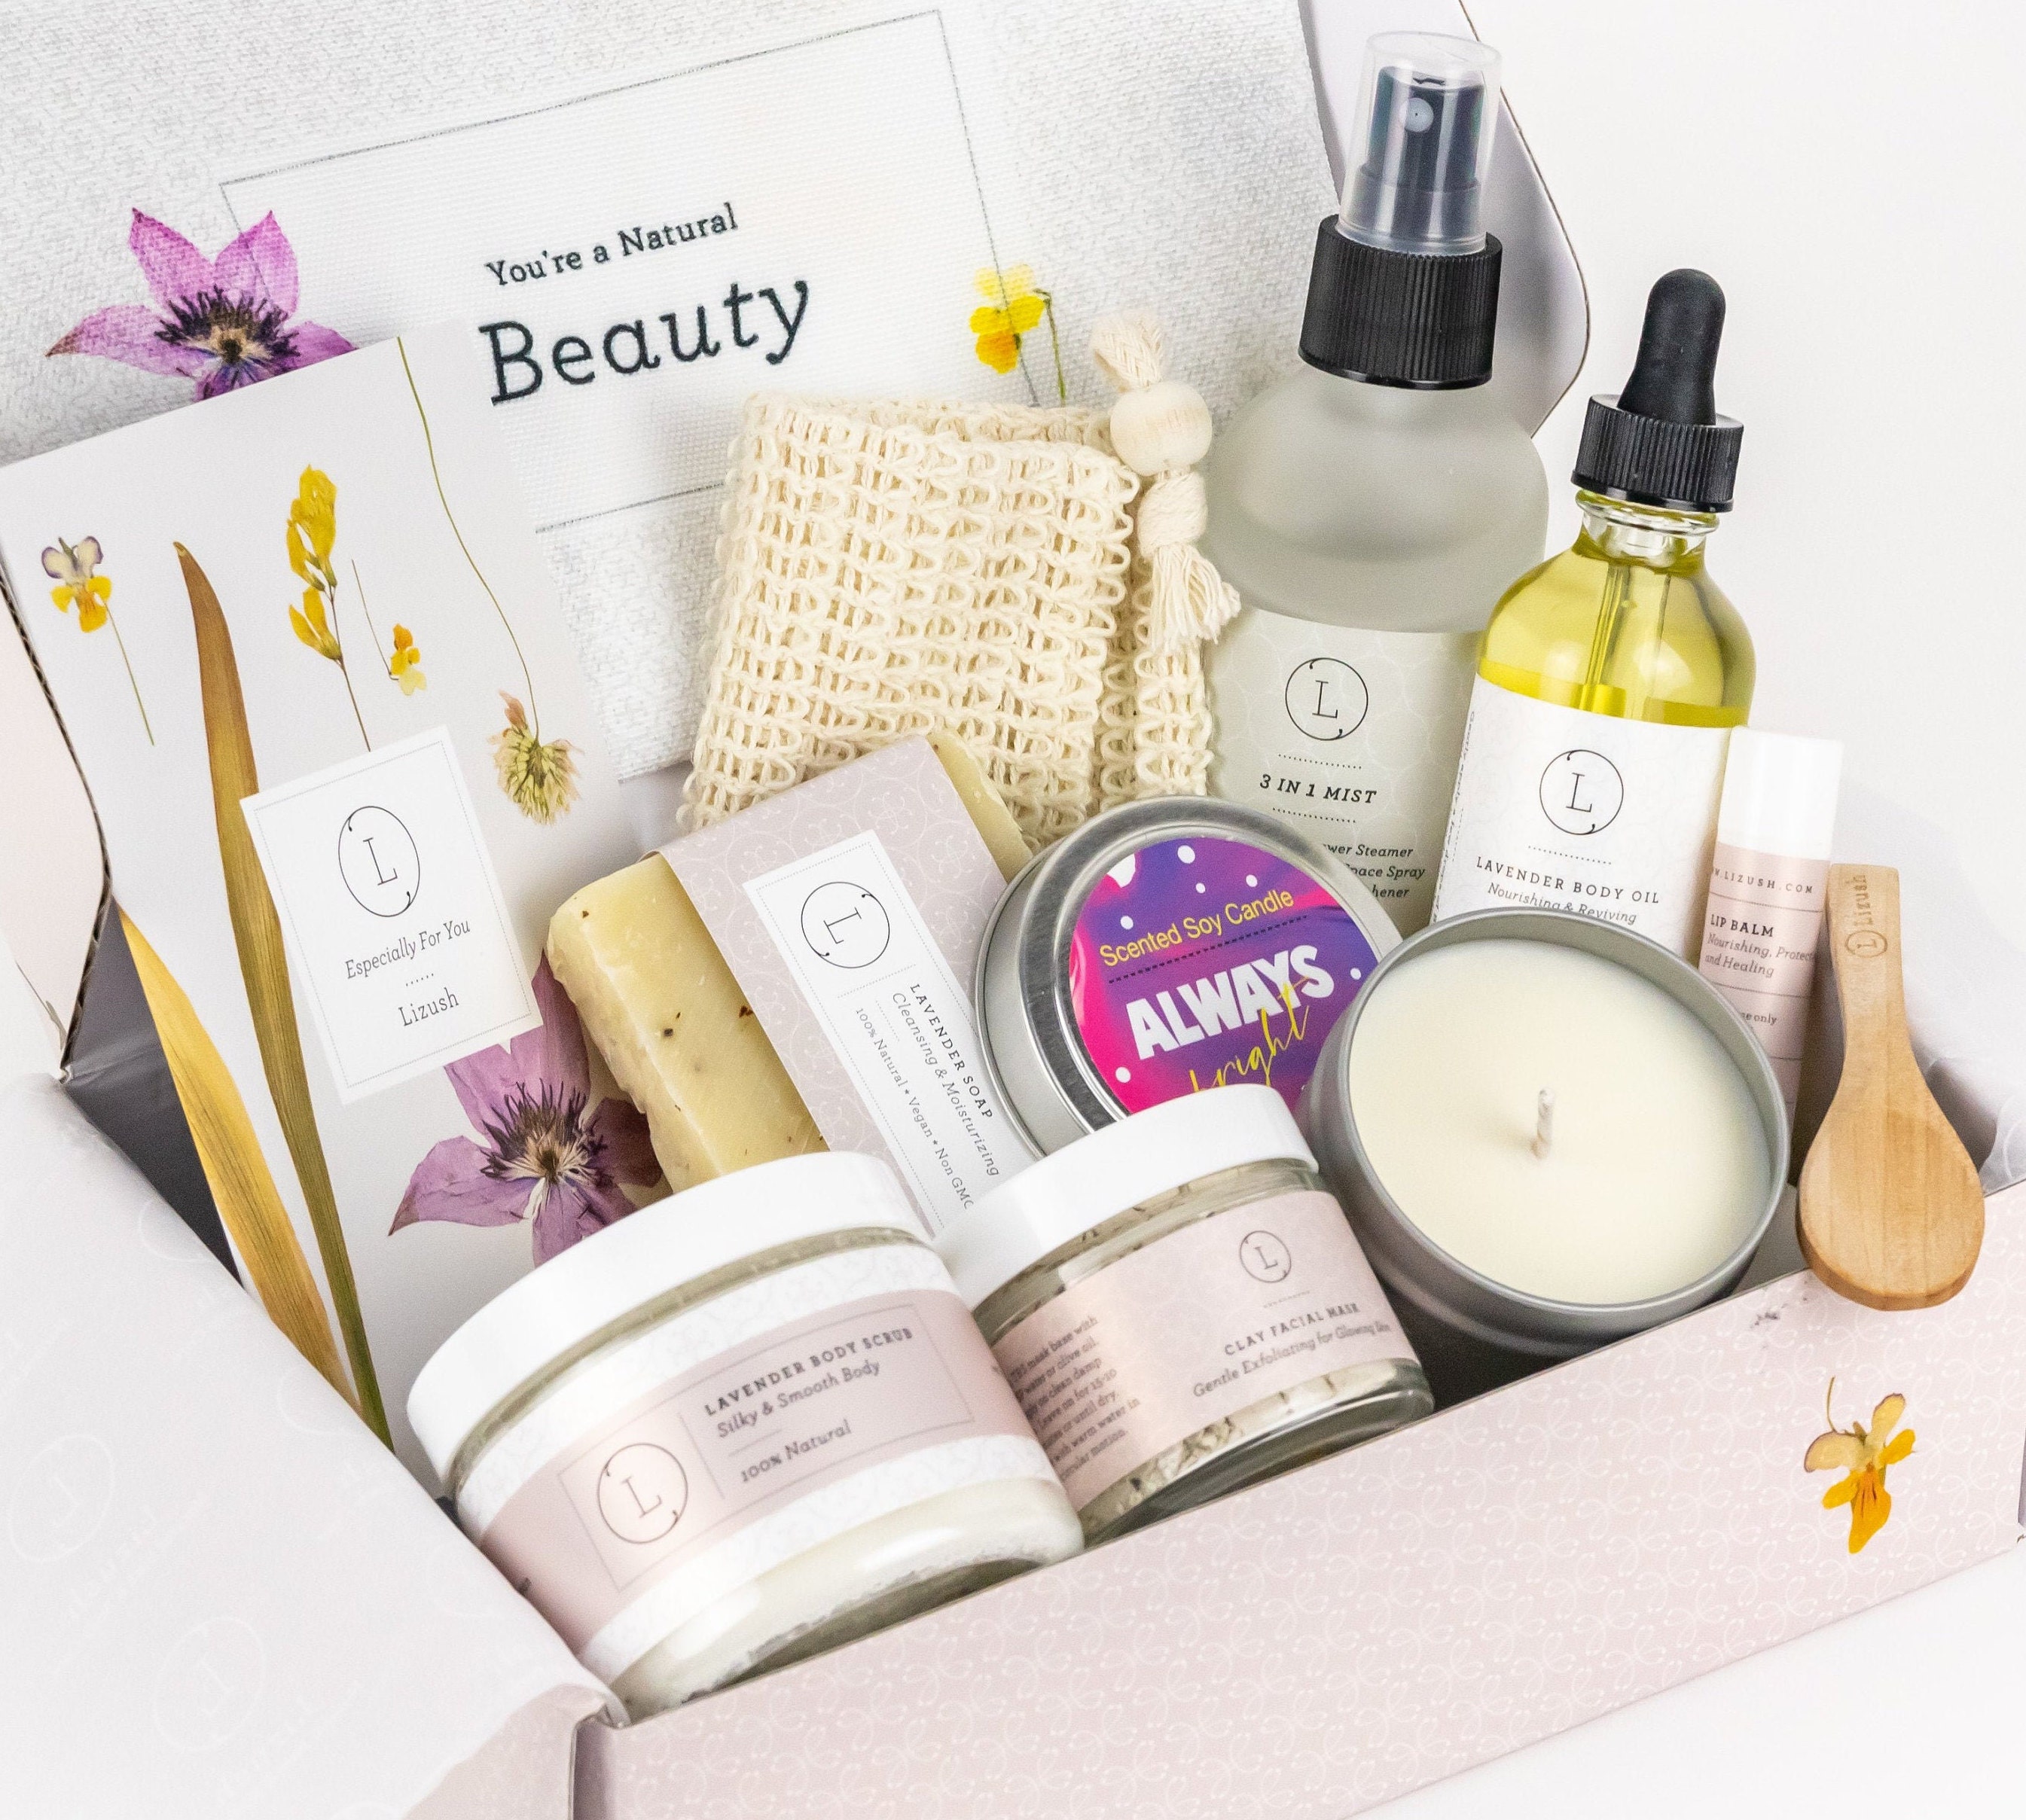 Unique Birthday Gift for Her  Positivity Package Self-Care Box